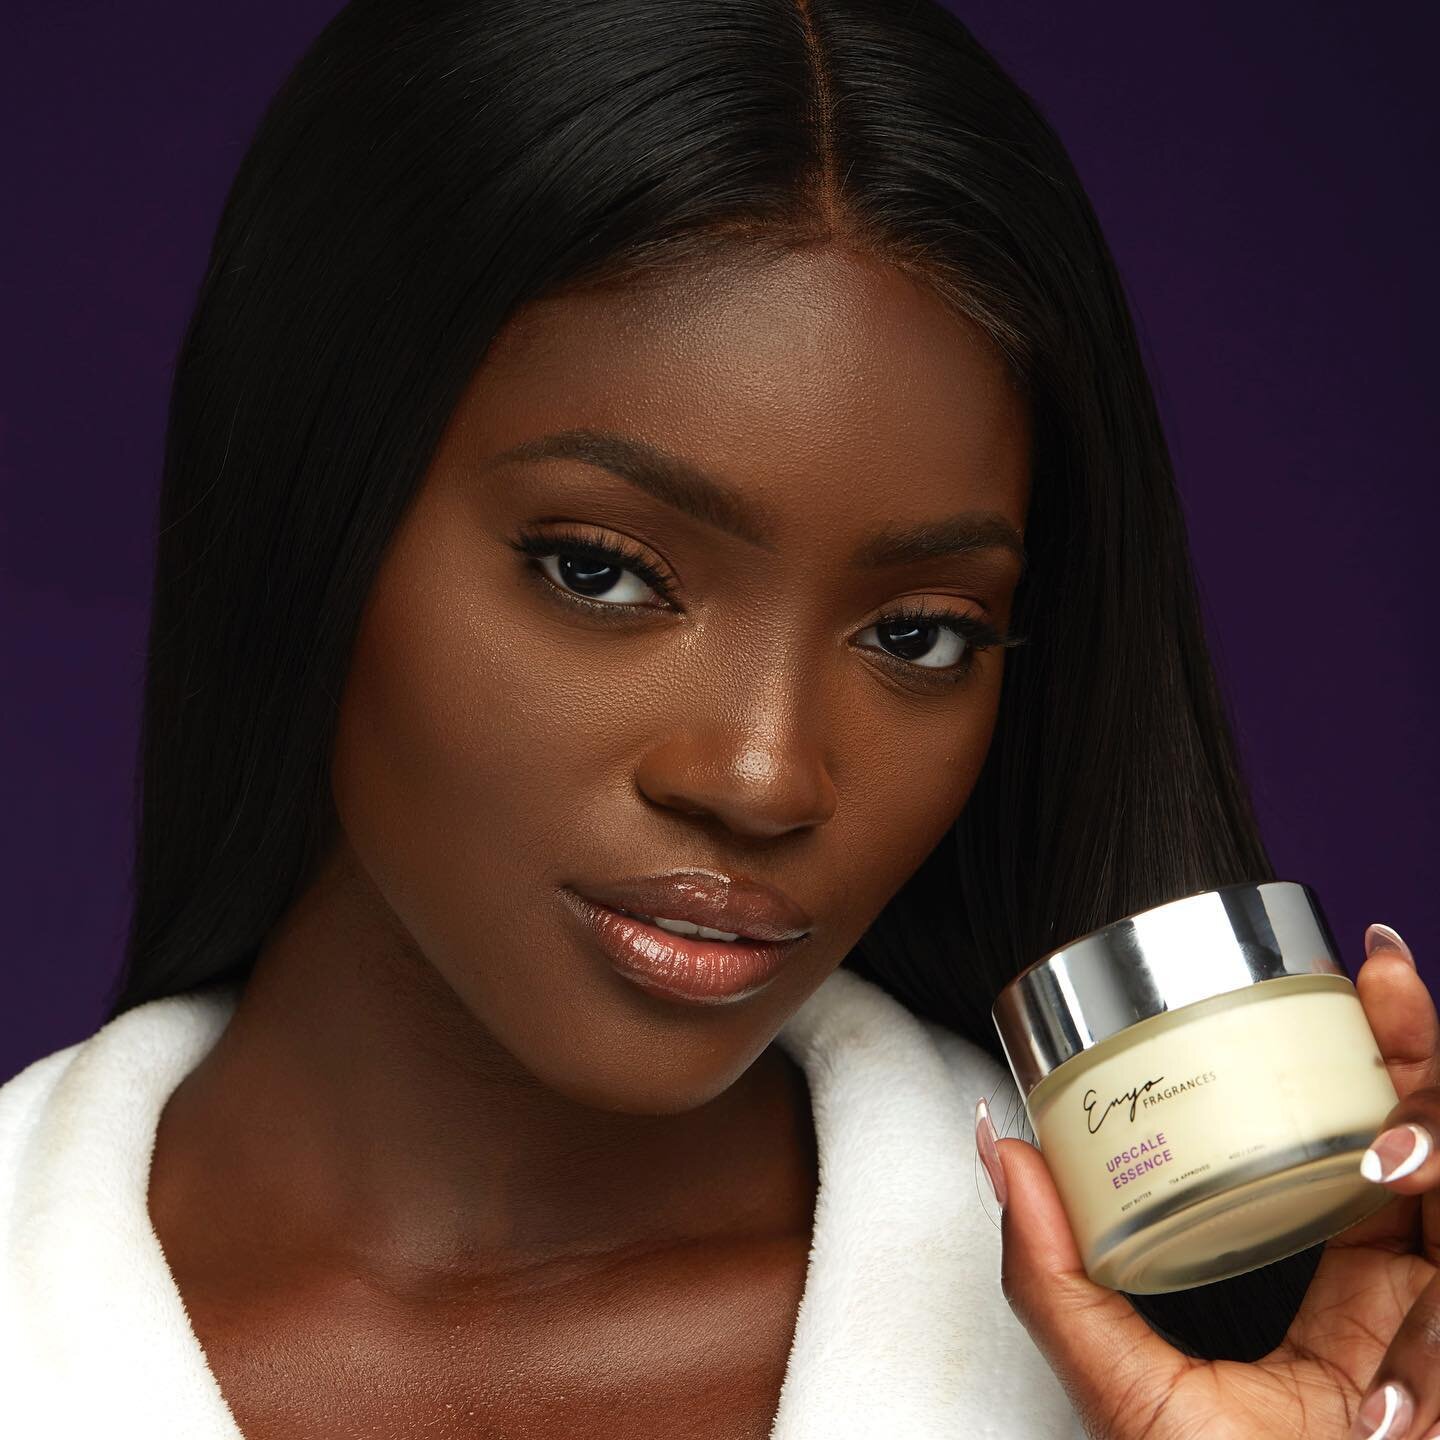 &ldquo;Upscale Essence&rdquo; Body Butter by Enyo Fragrances // Available Now at Enyofragrances.com